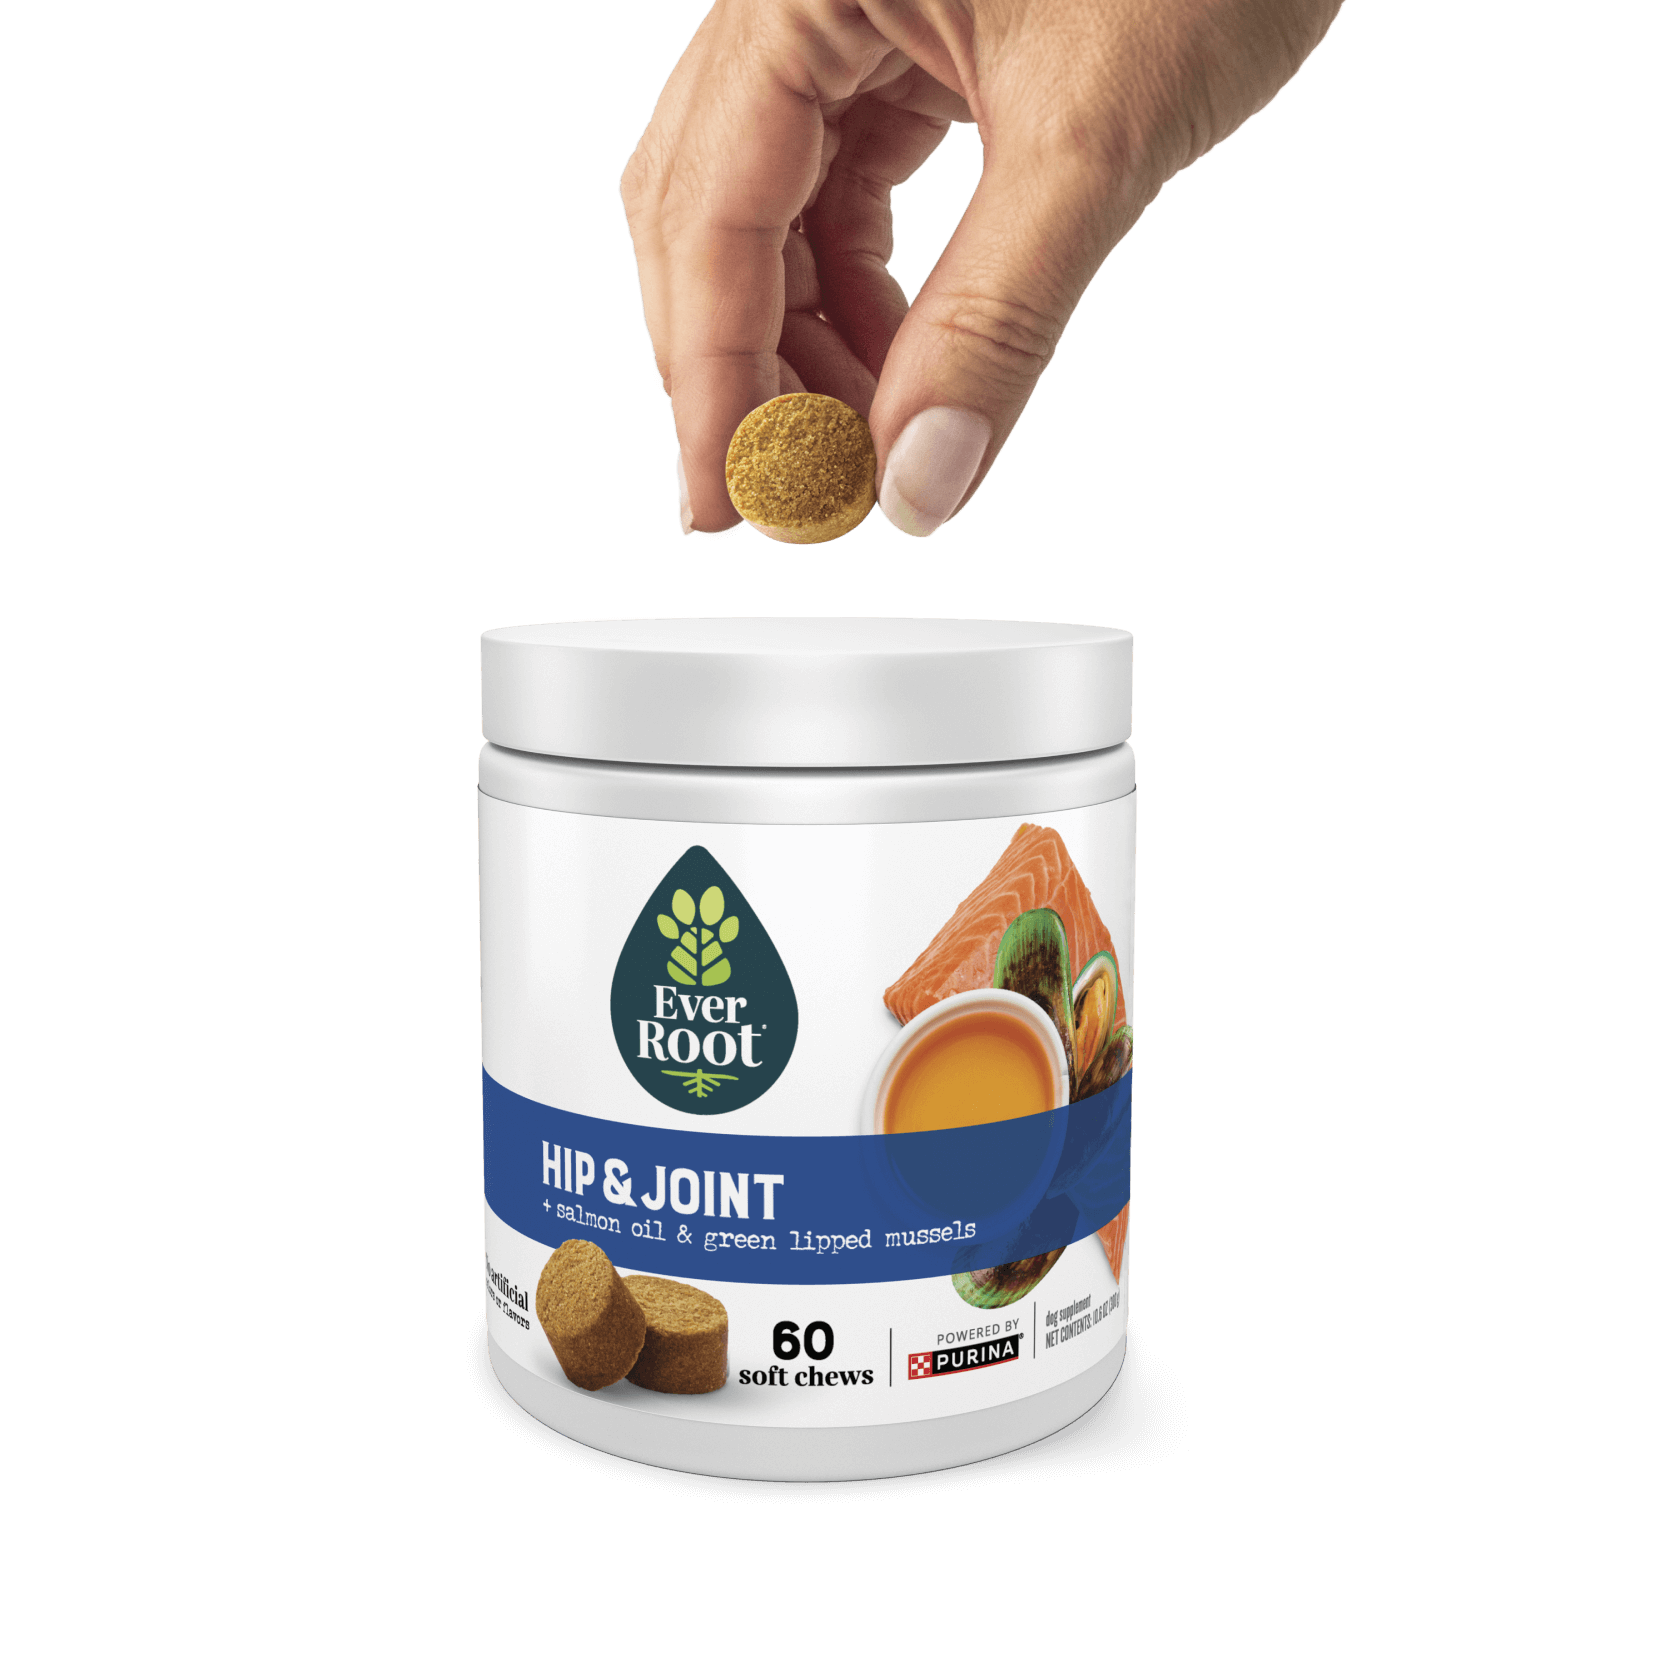 Hand holding a chew, hovering over a container of EverRoot hip and joint soft chews